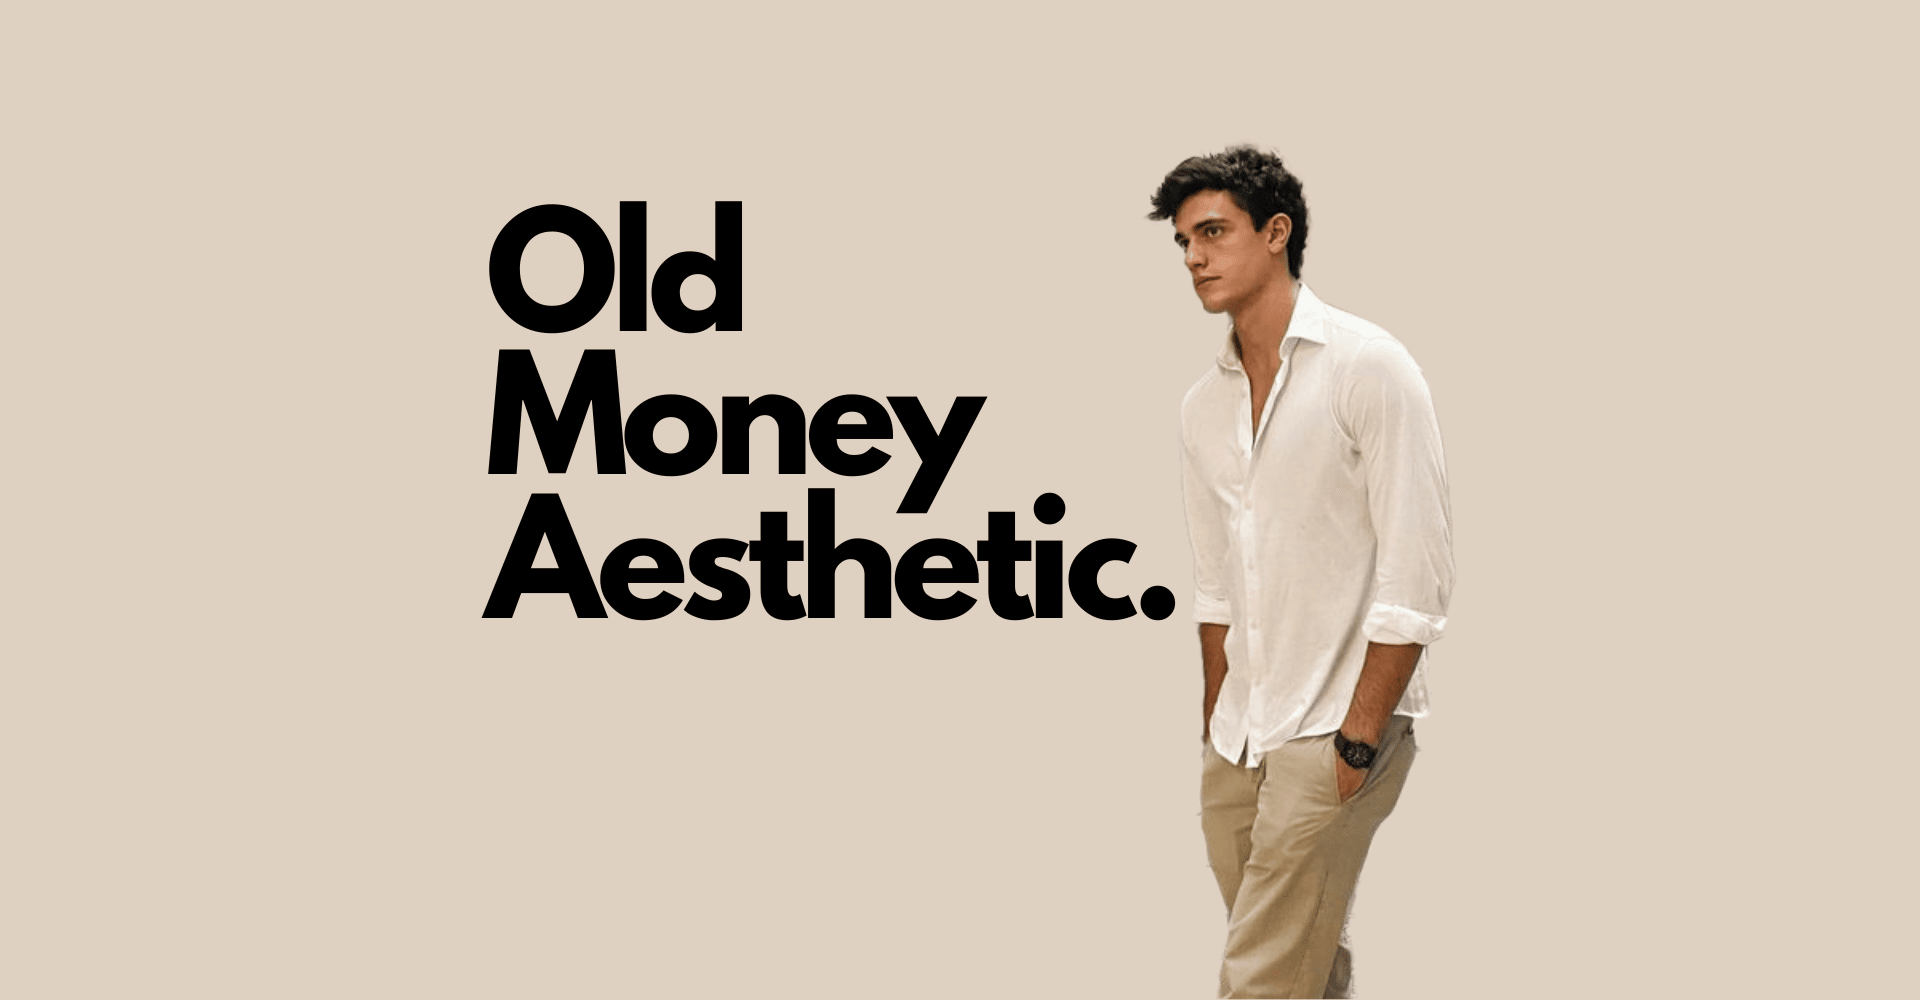 Old Money Aesthetic East Coast Rich In Old Money Aesthetic Photos | My ...